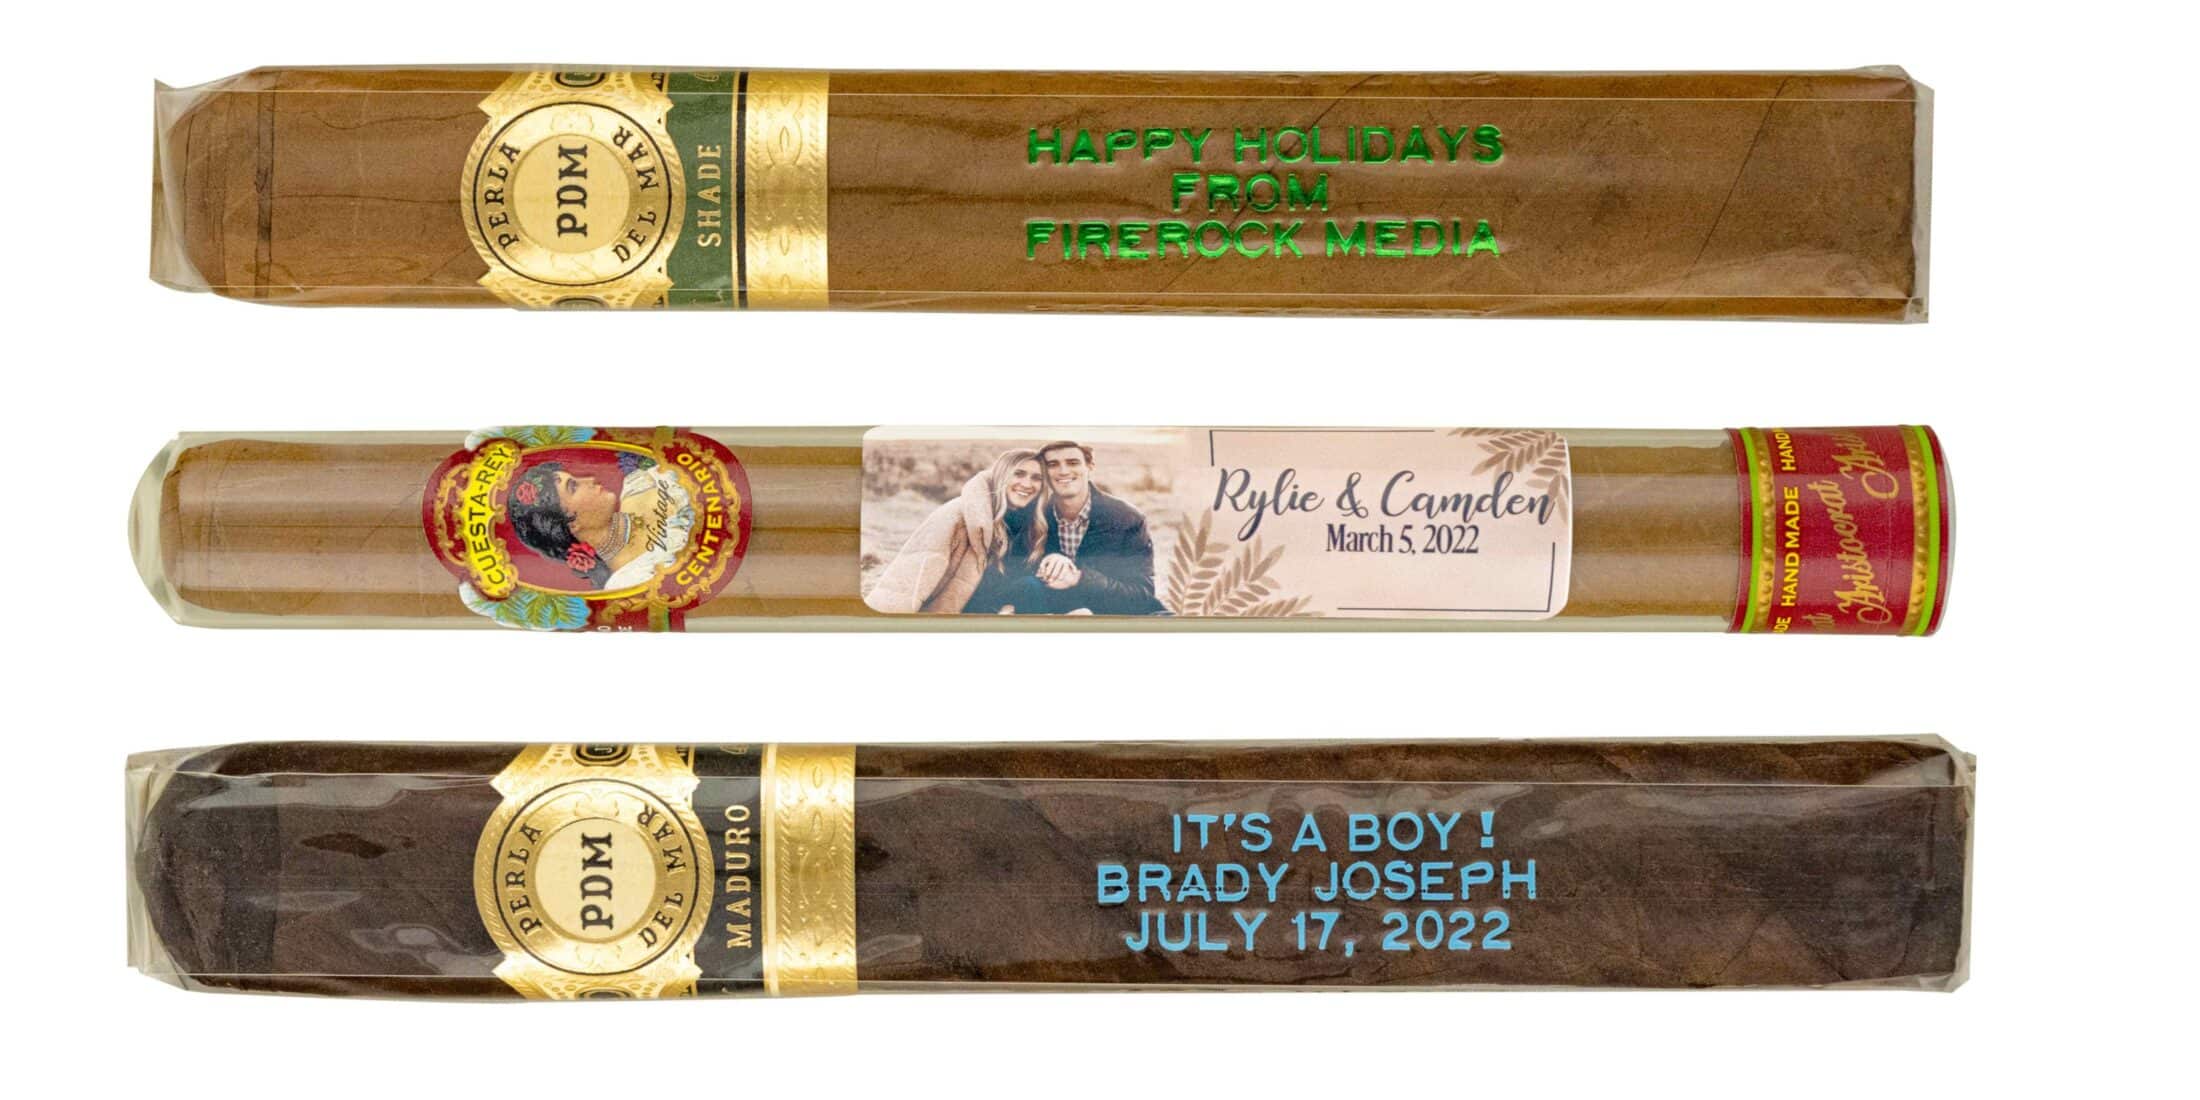 Personalized Cigars are the Perfect Holiday Corporate Gifts - LM Cigars